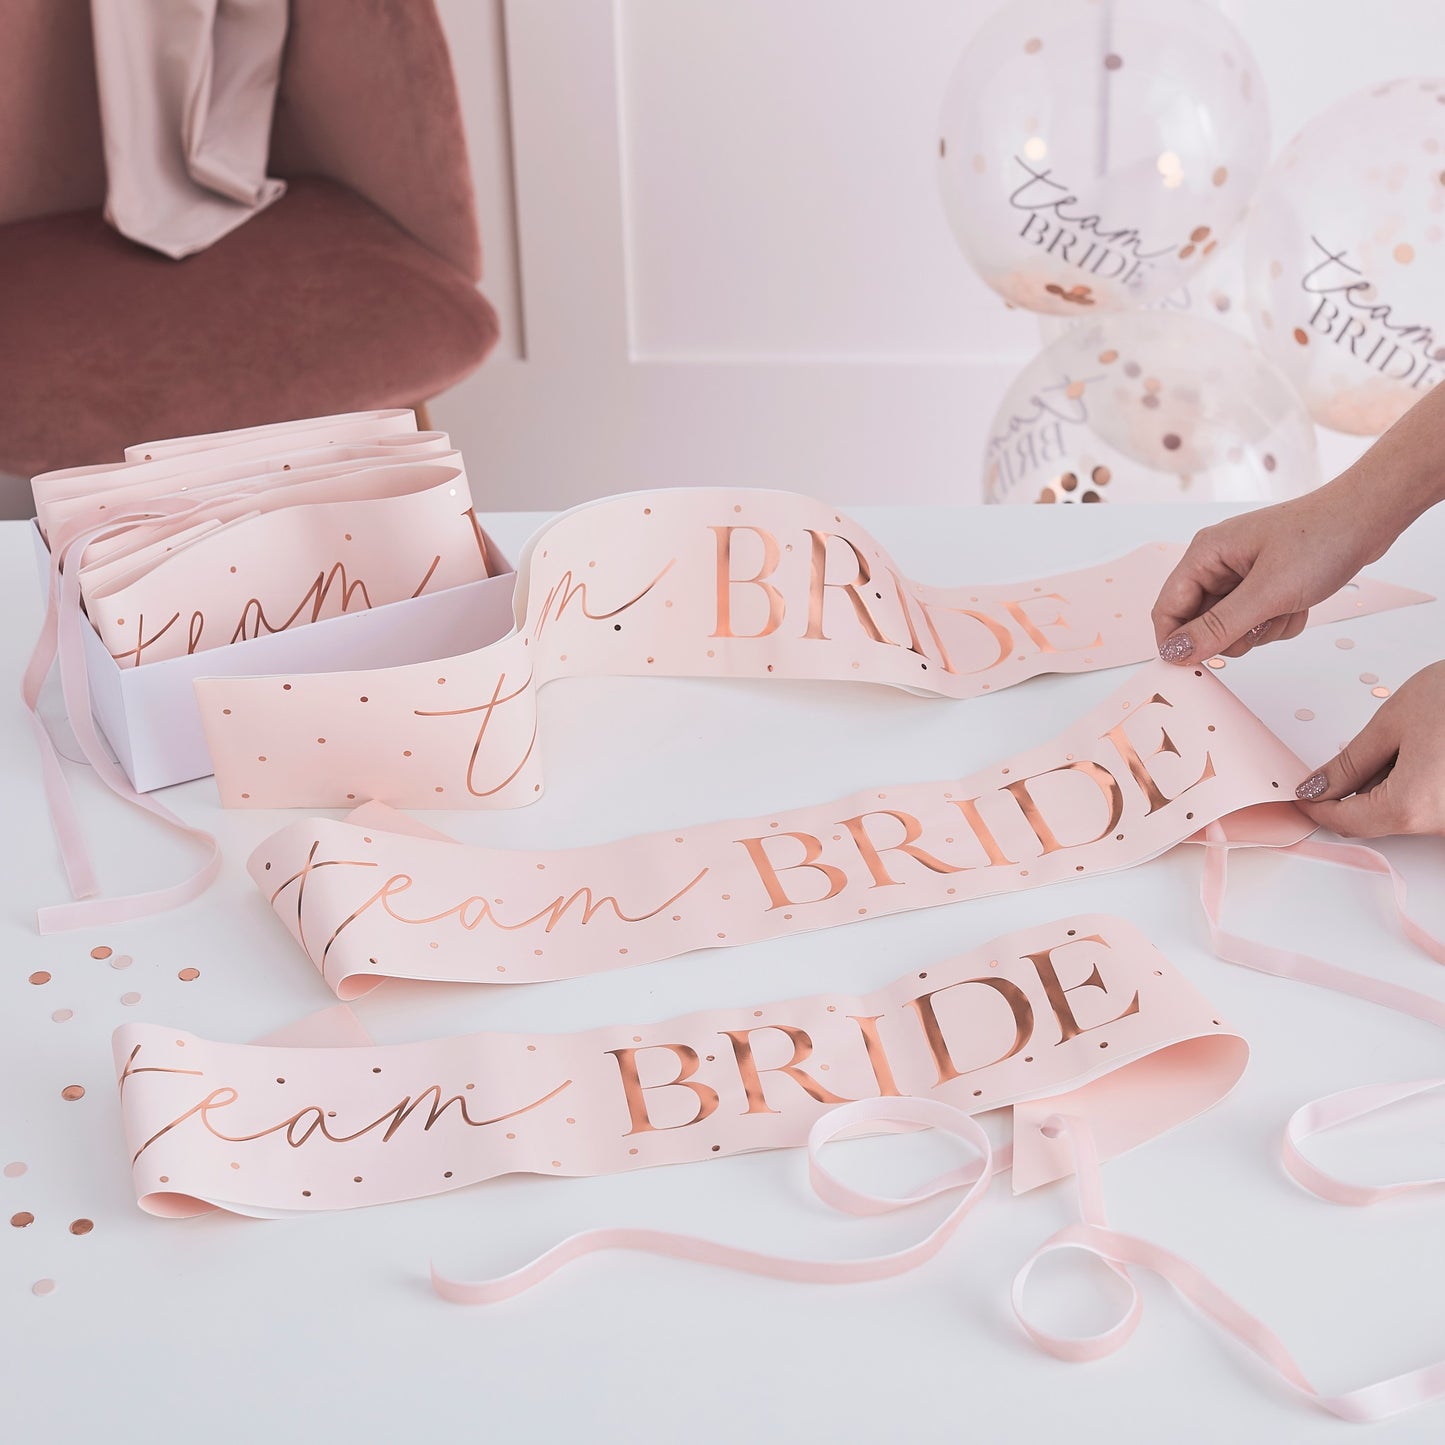 Team Bride Rose Gold Party Sashes